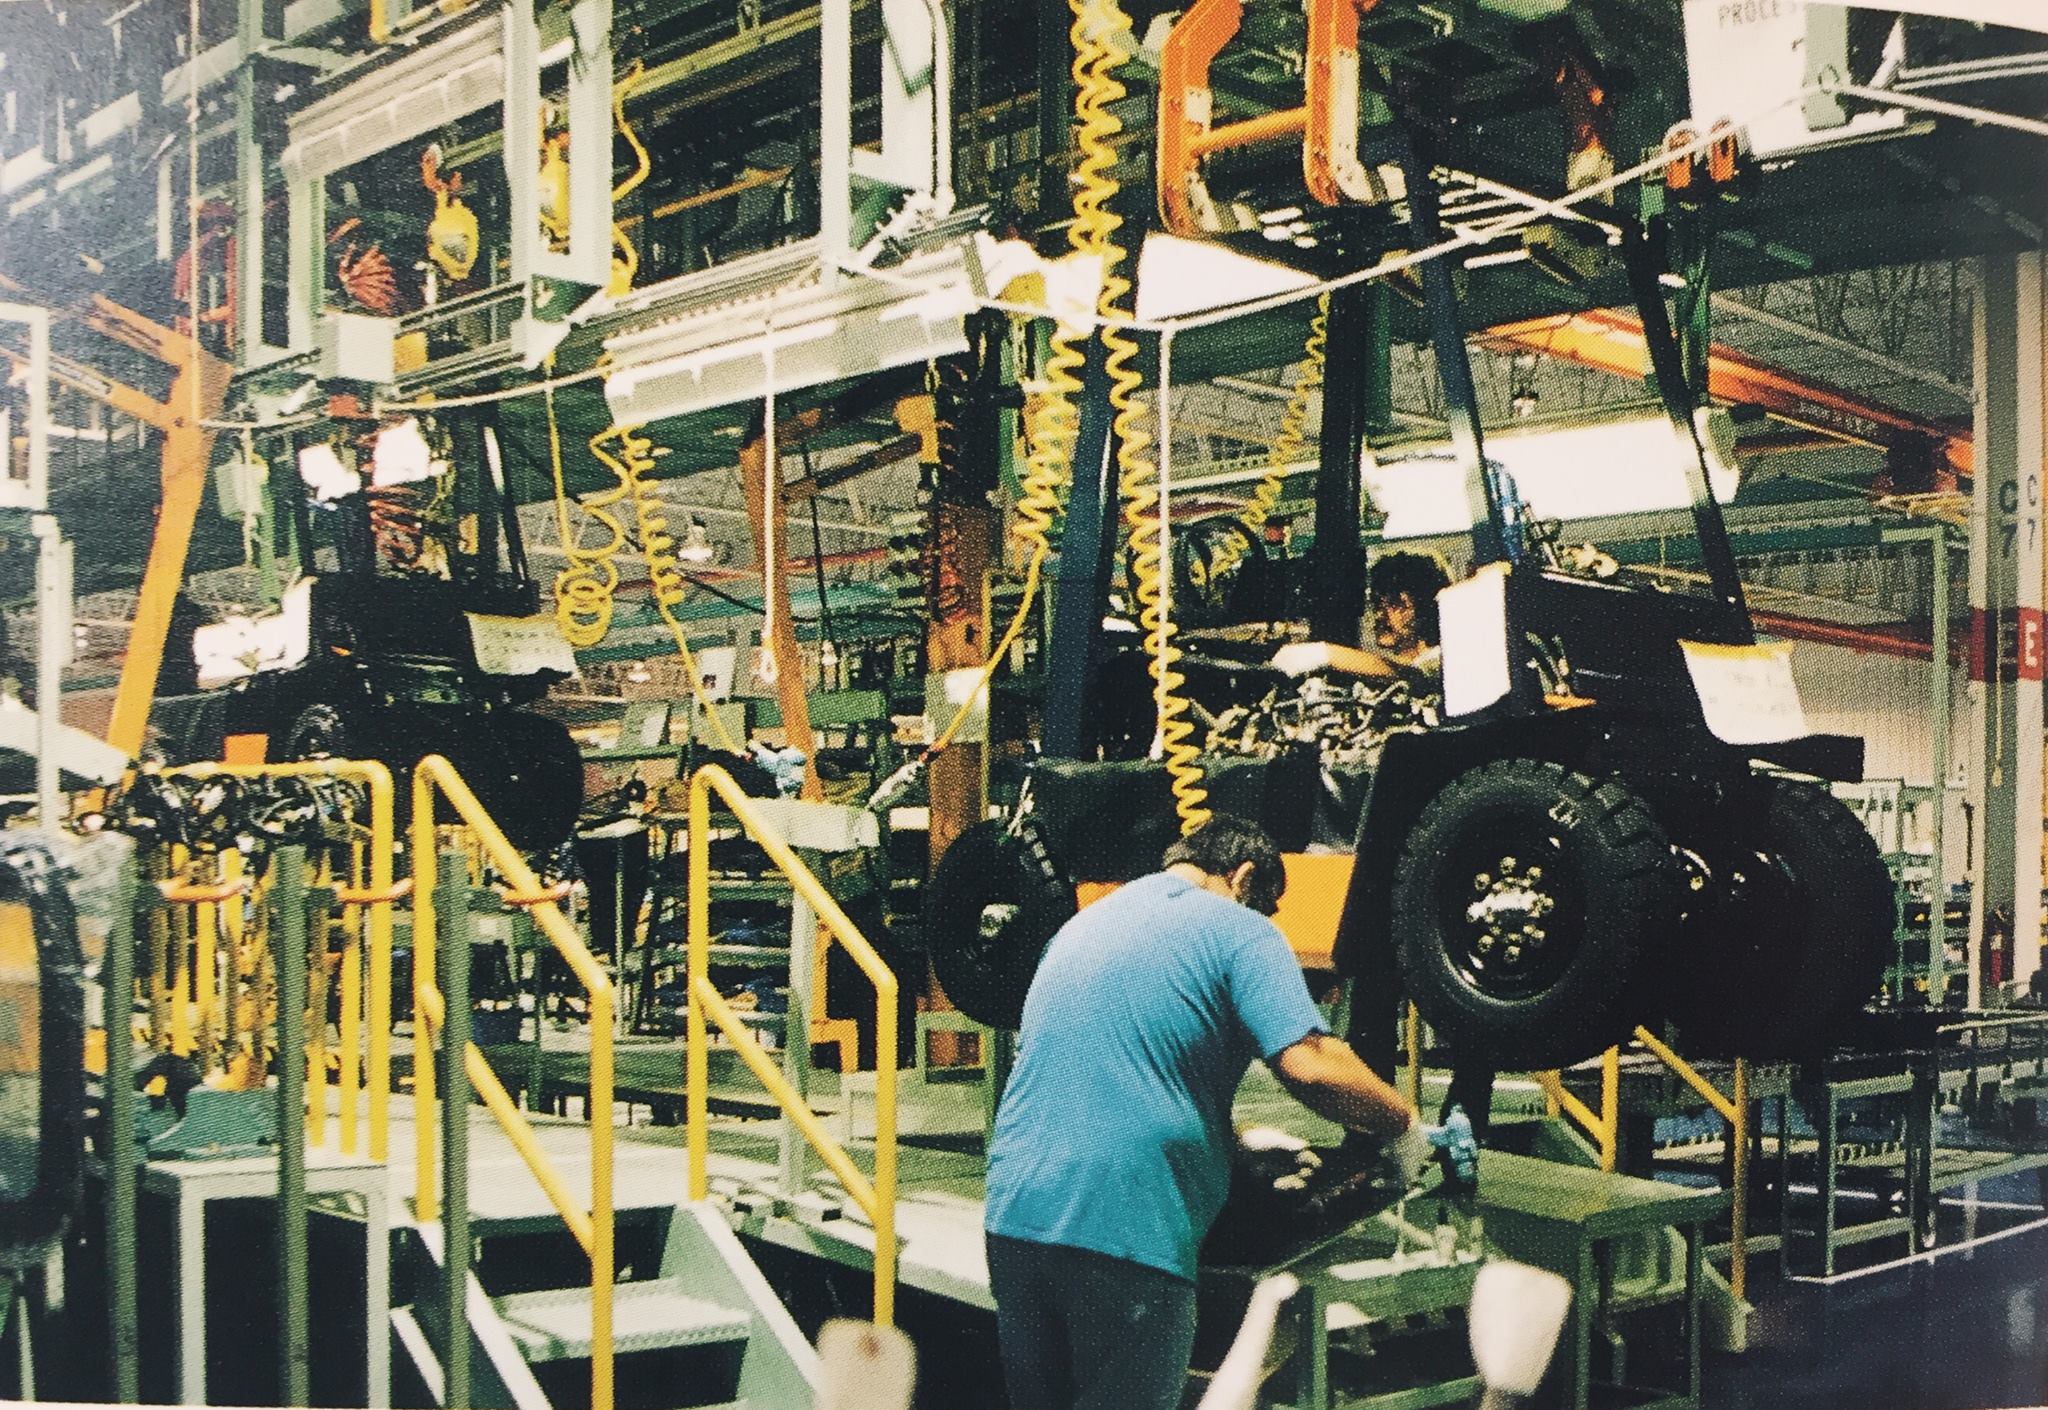 toyota-assembly-line-golf-carts